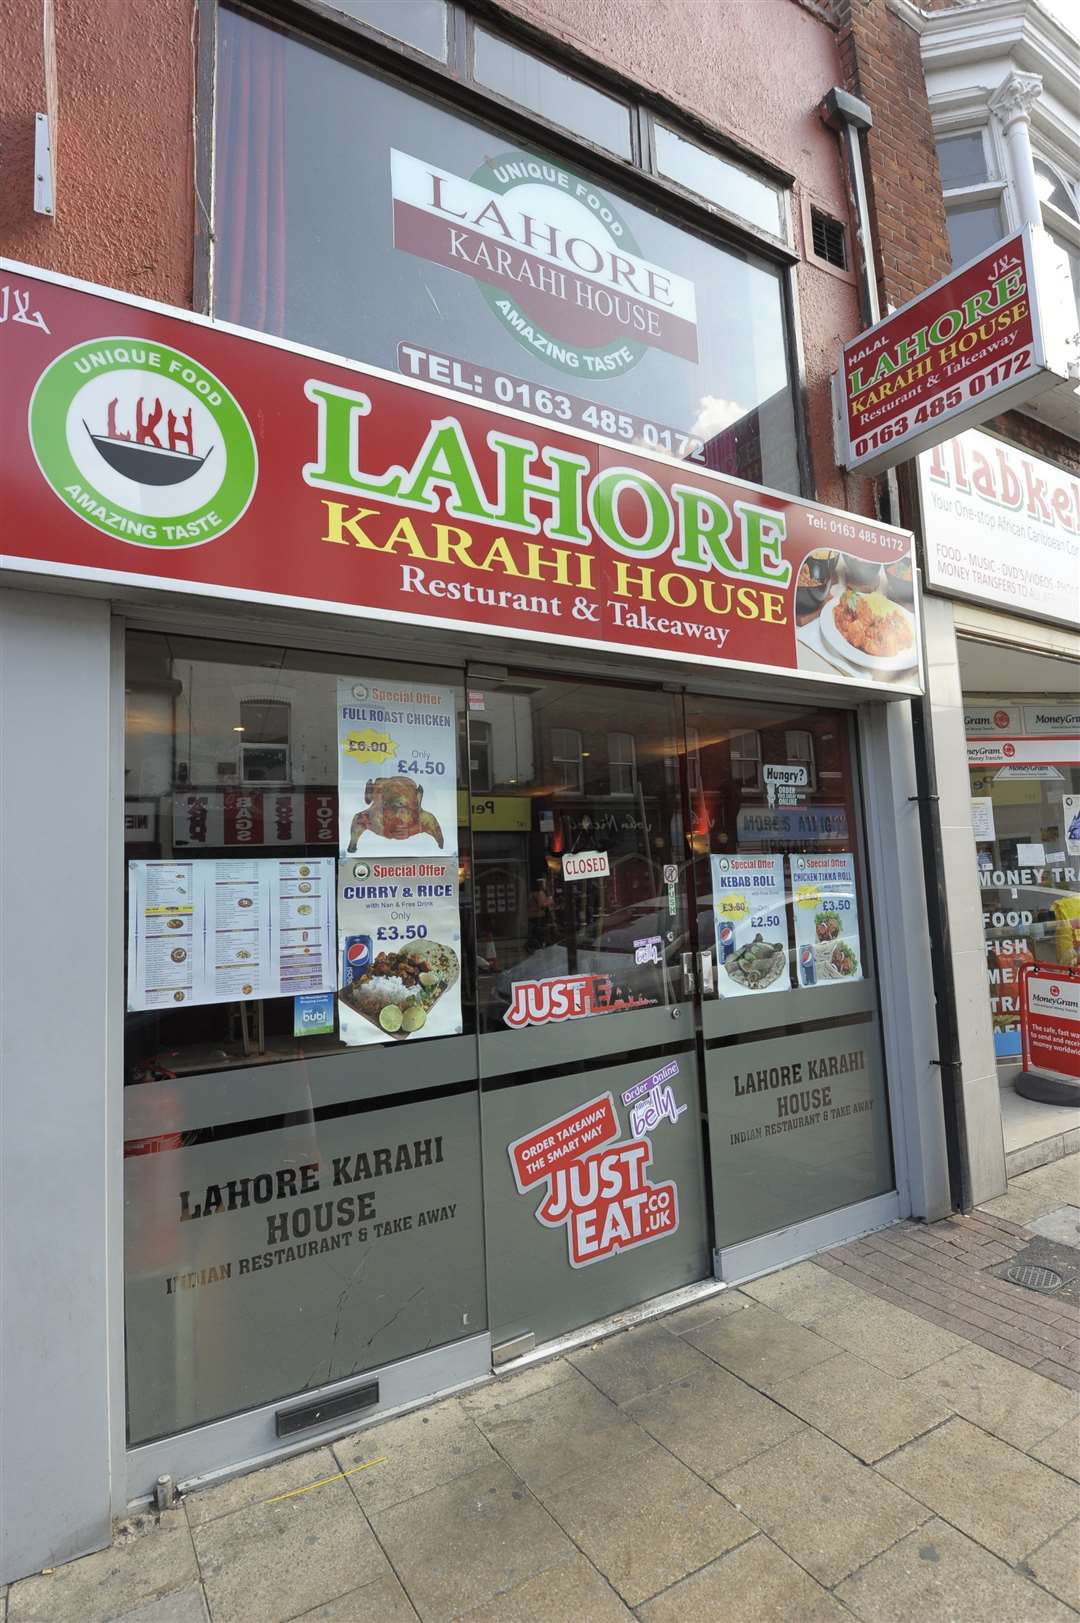 The boss of the Lahore takeaway in Gillingham was fined